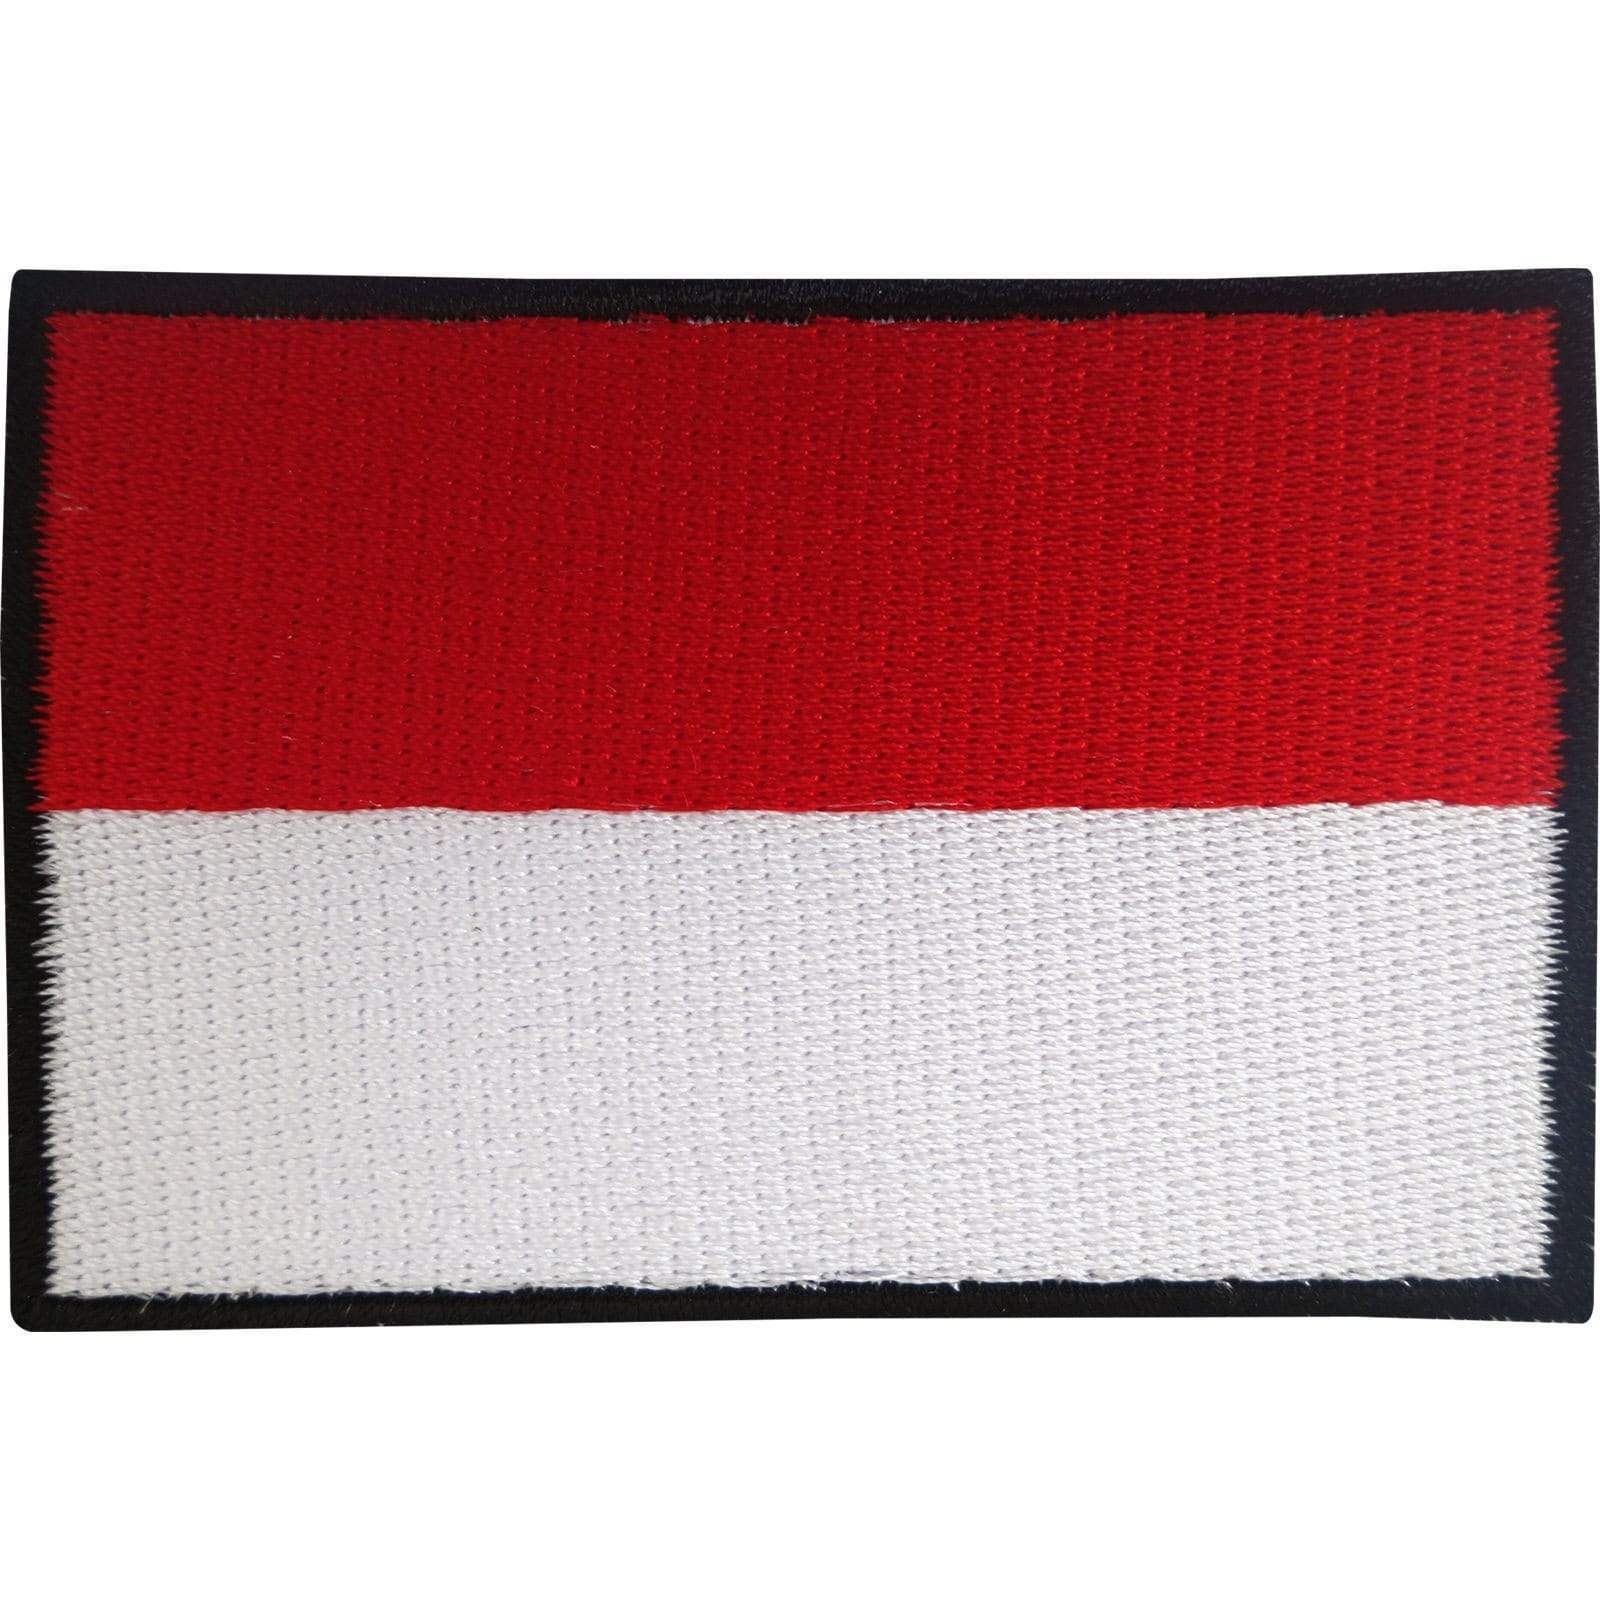 Indonesia Flag Patch Iron On Badge / Sew On Indonesian Flag Embroidered Applique